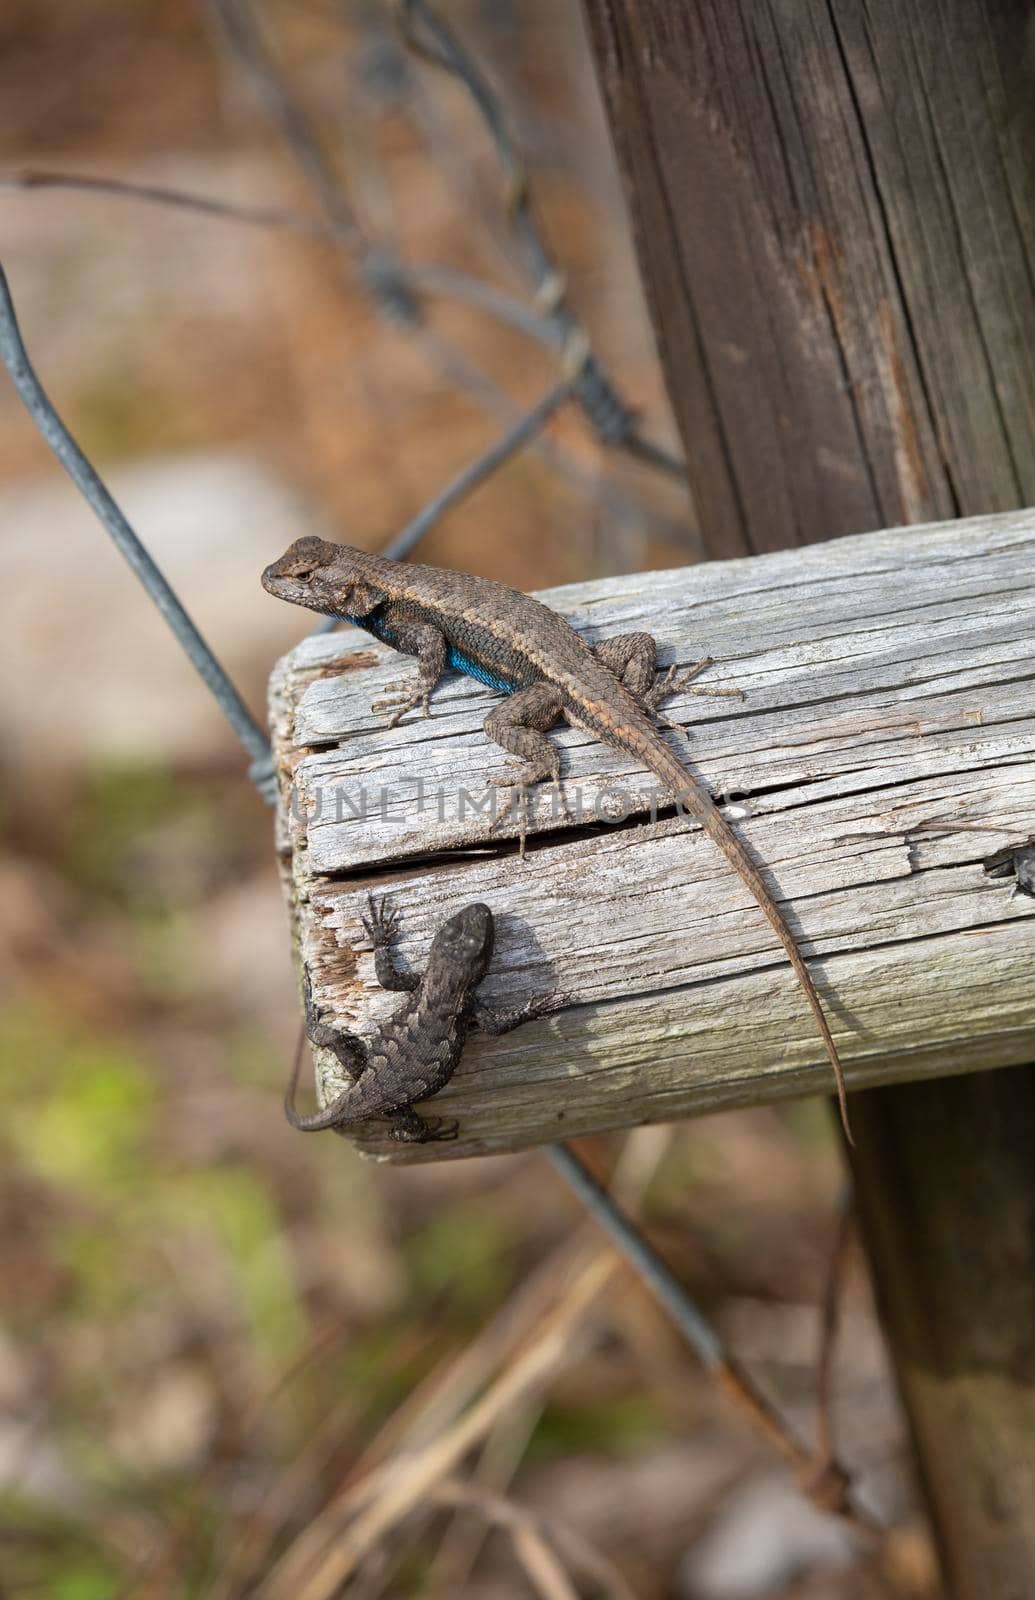 Female eastern fence lizard (Sceloporus consobrinus) approaching a large male on a wooden post